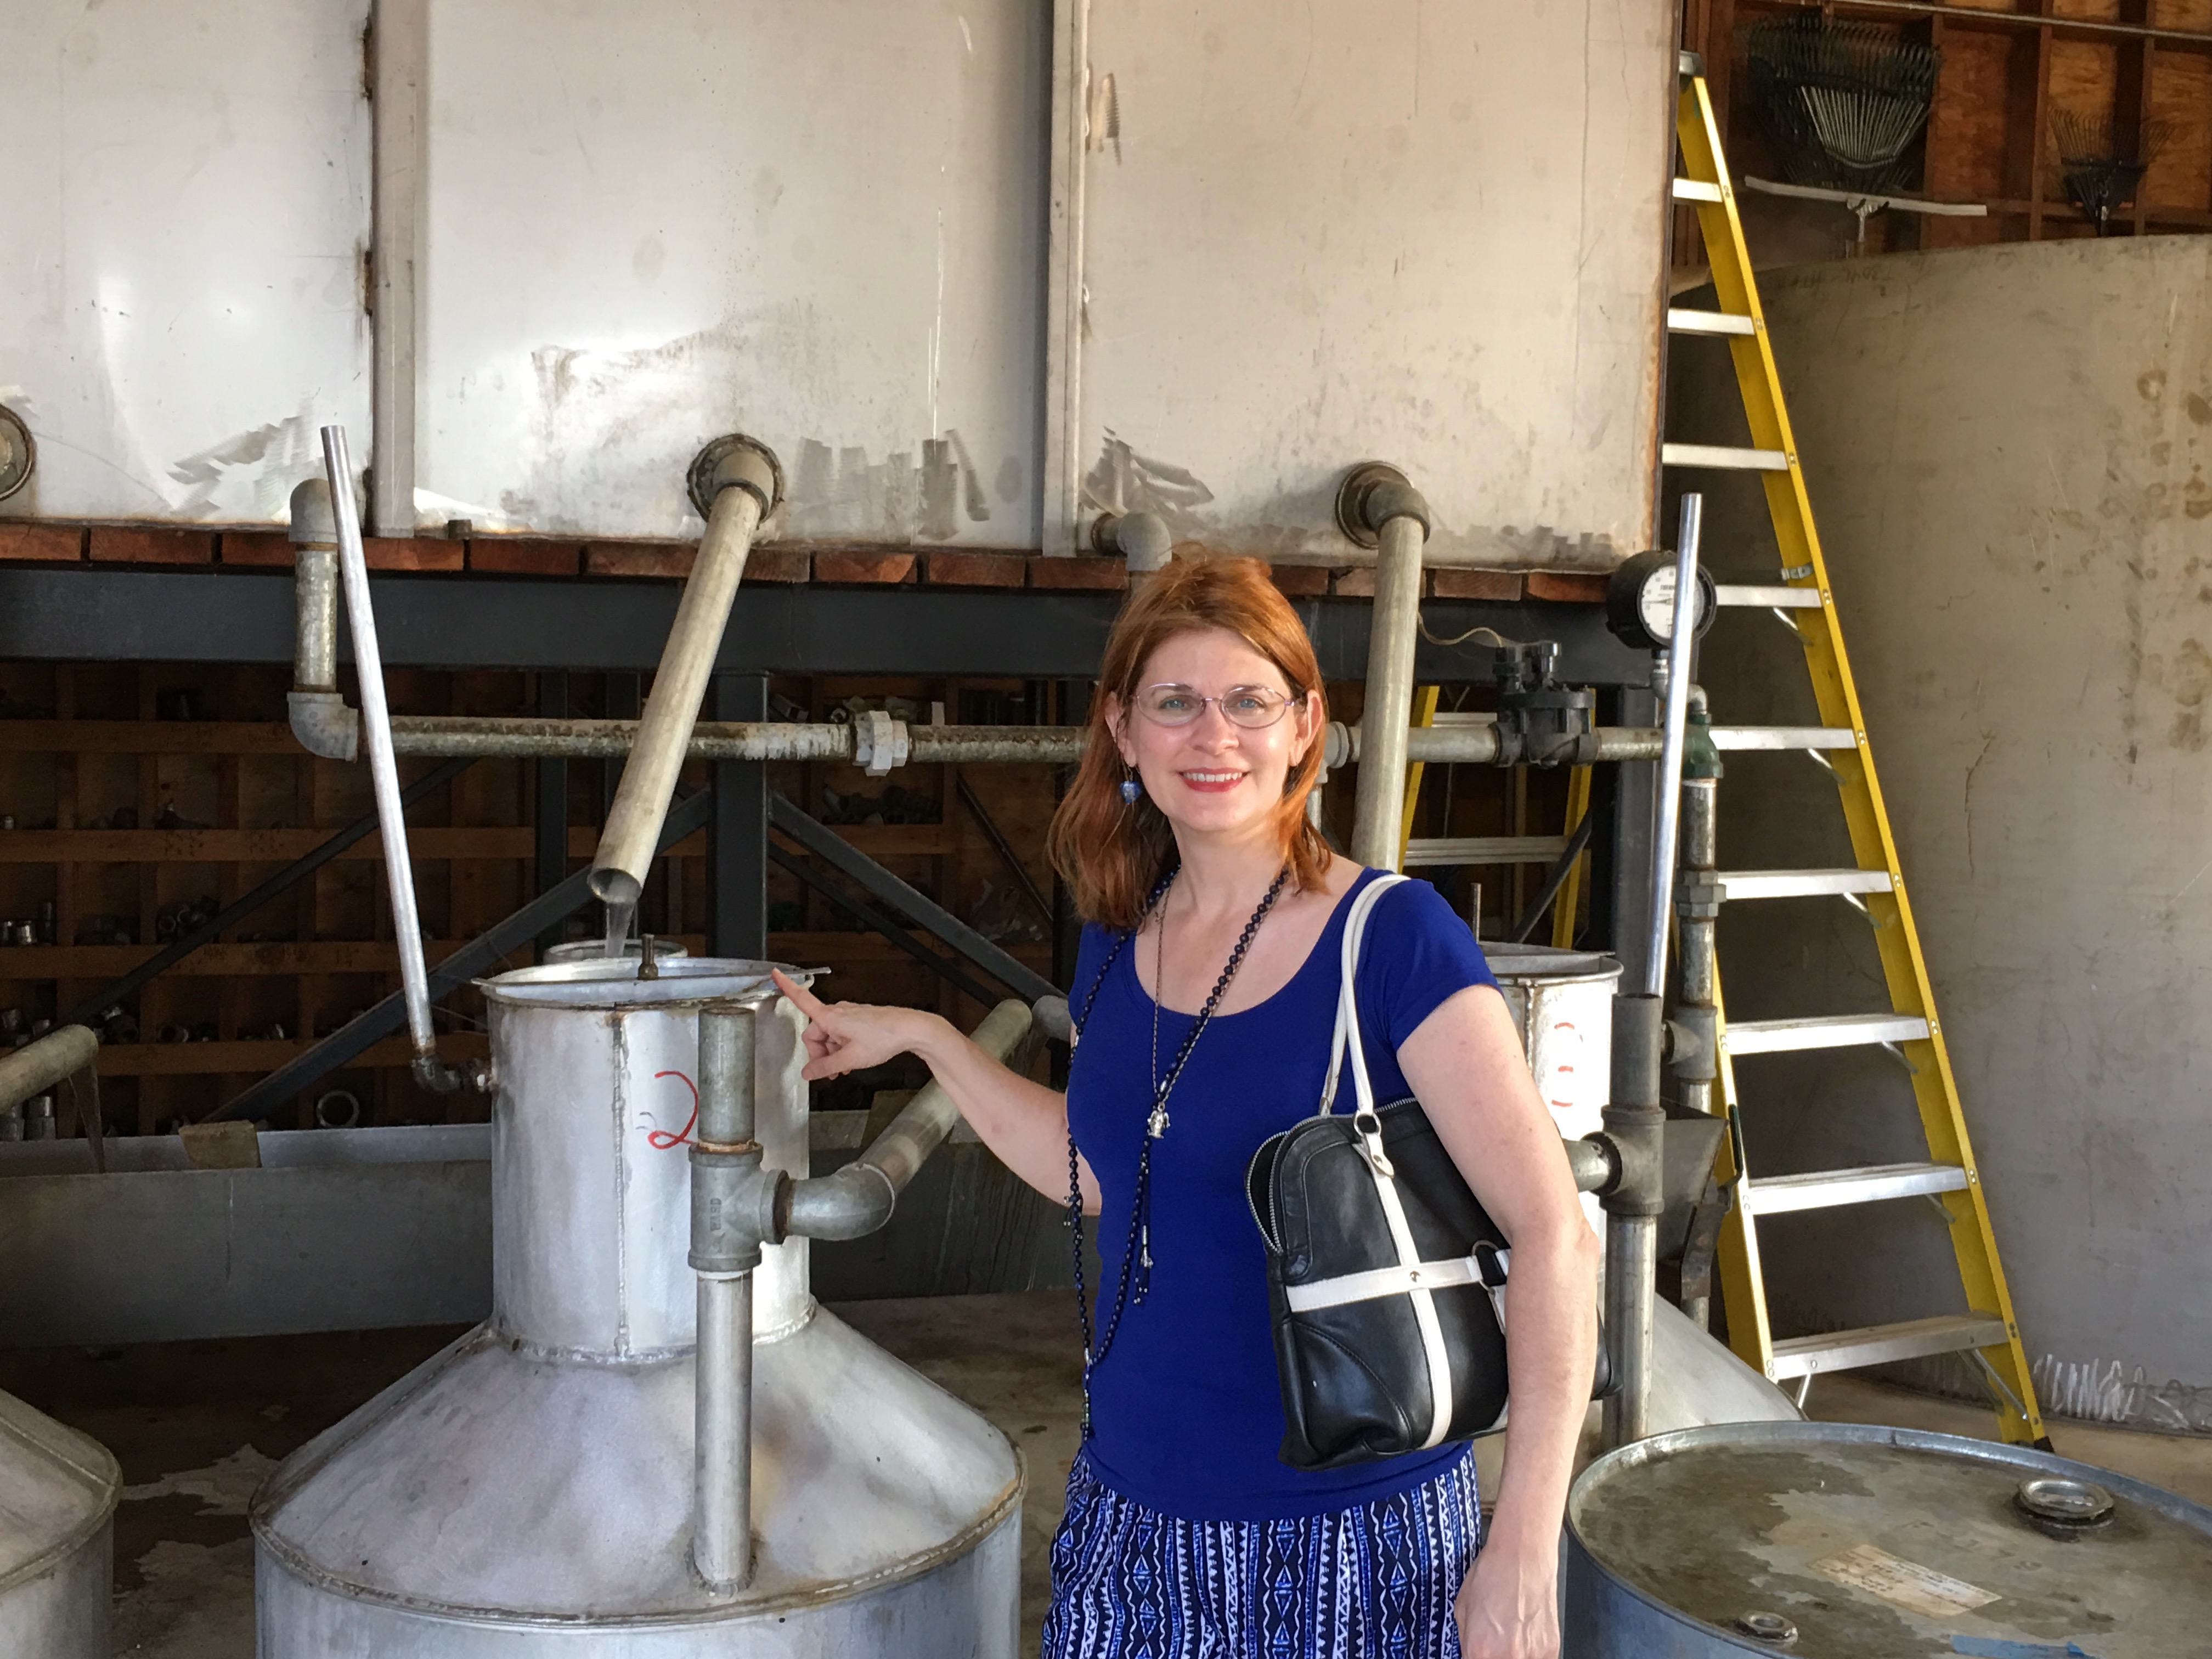 Cynthia Foster, MD at an Essential Oil Distillery